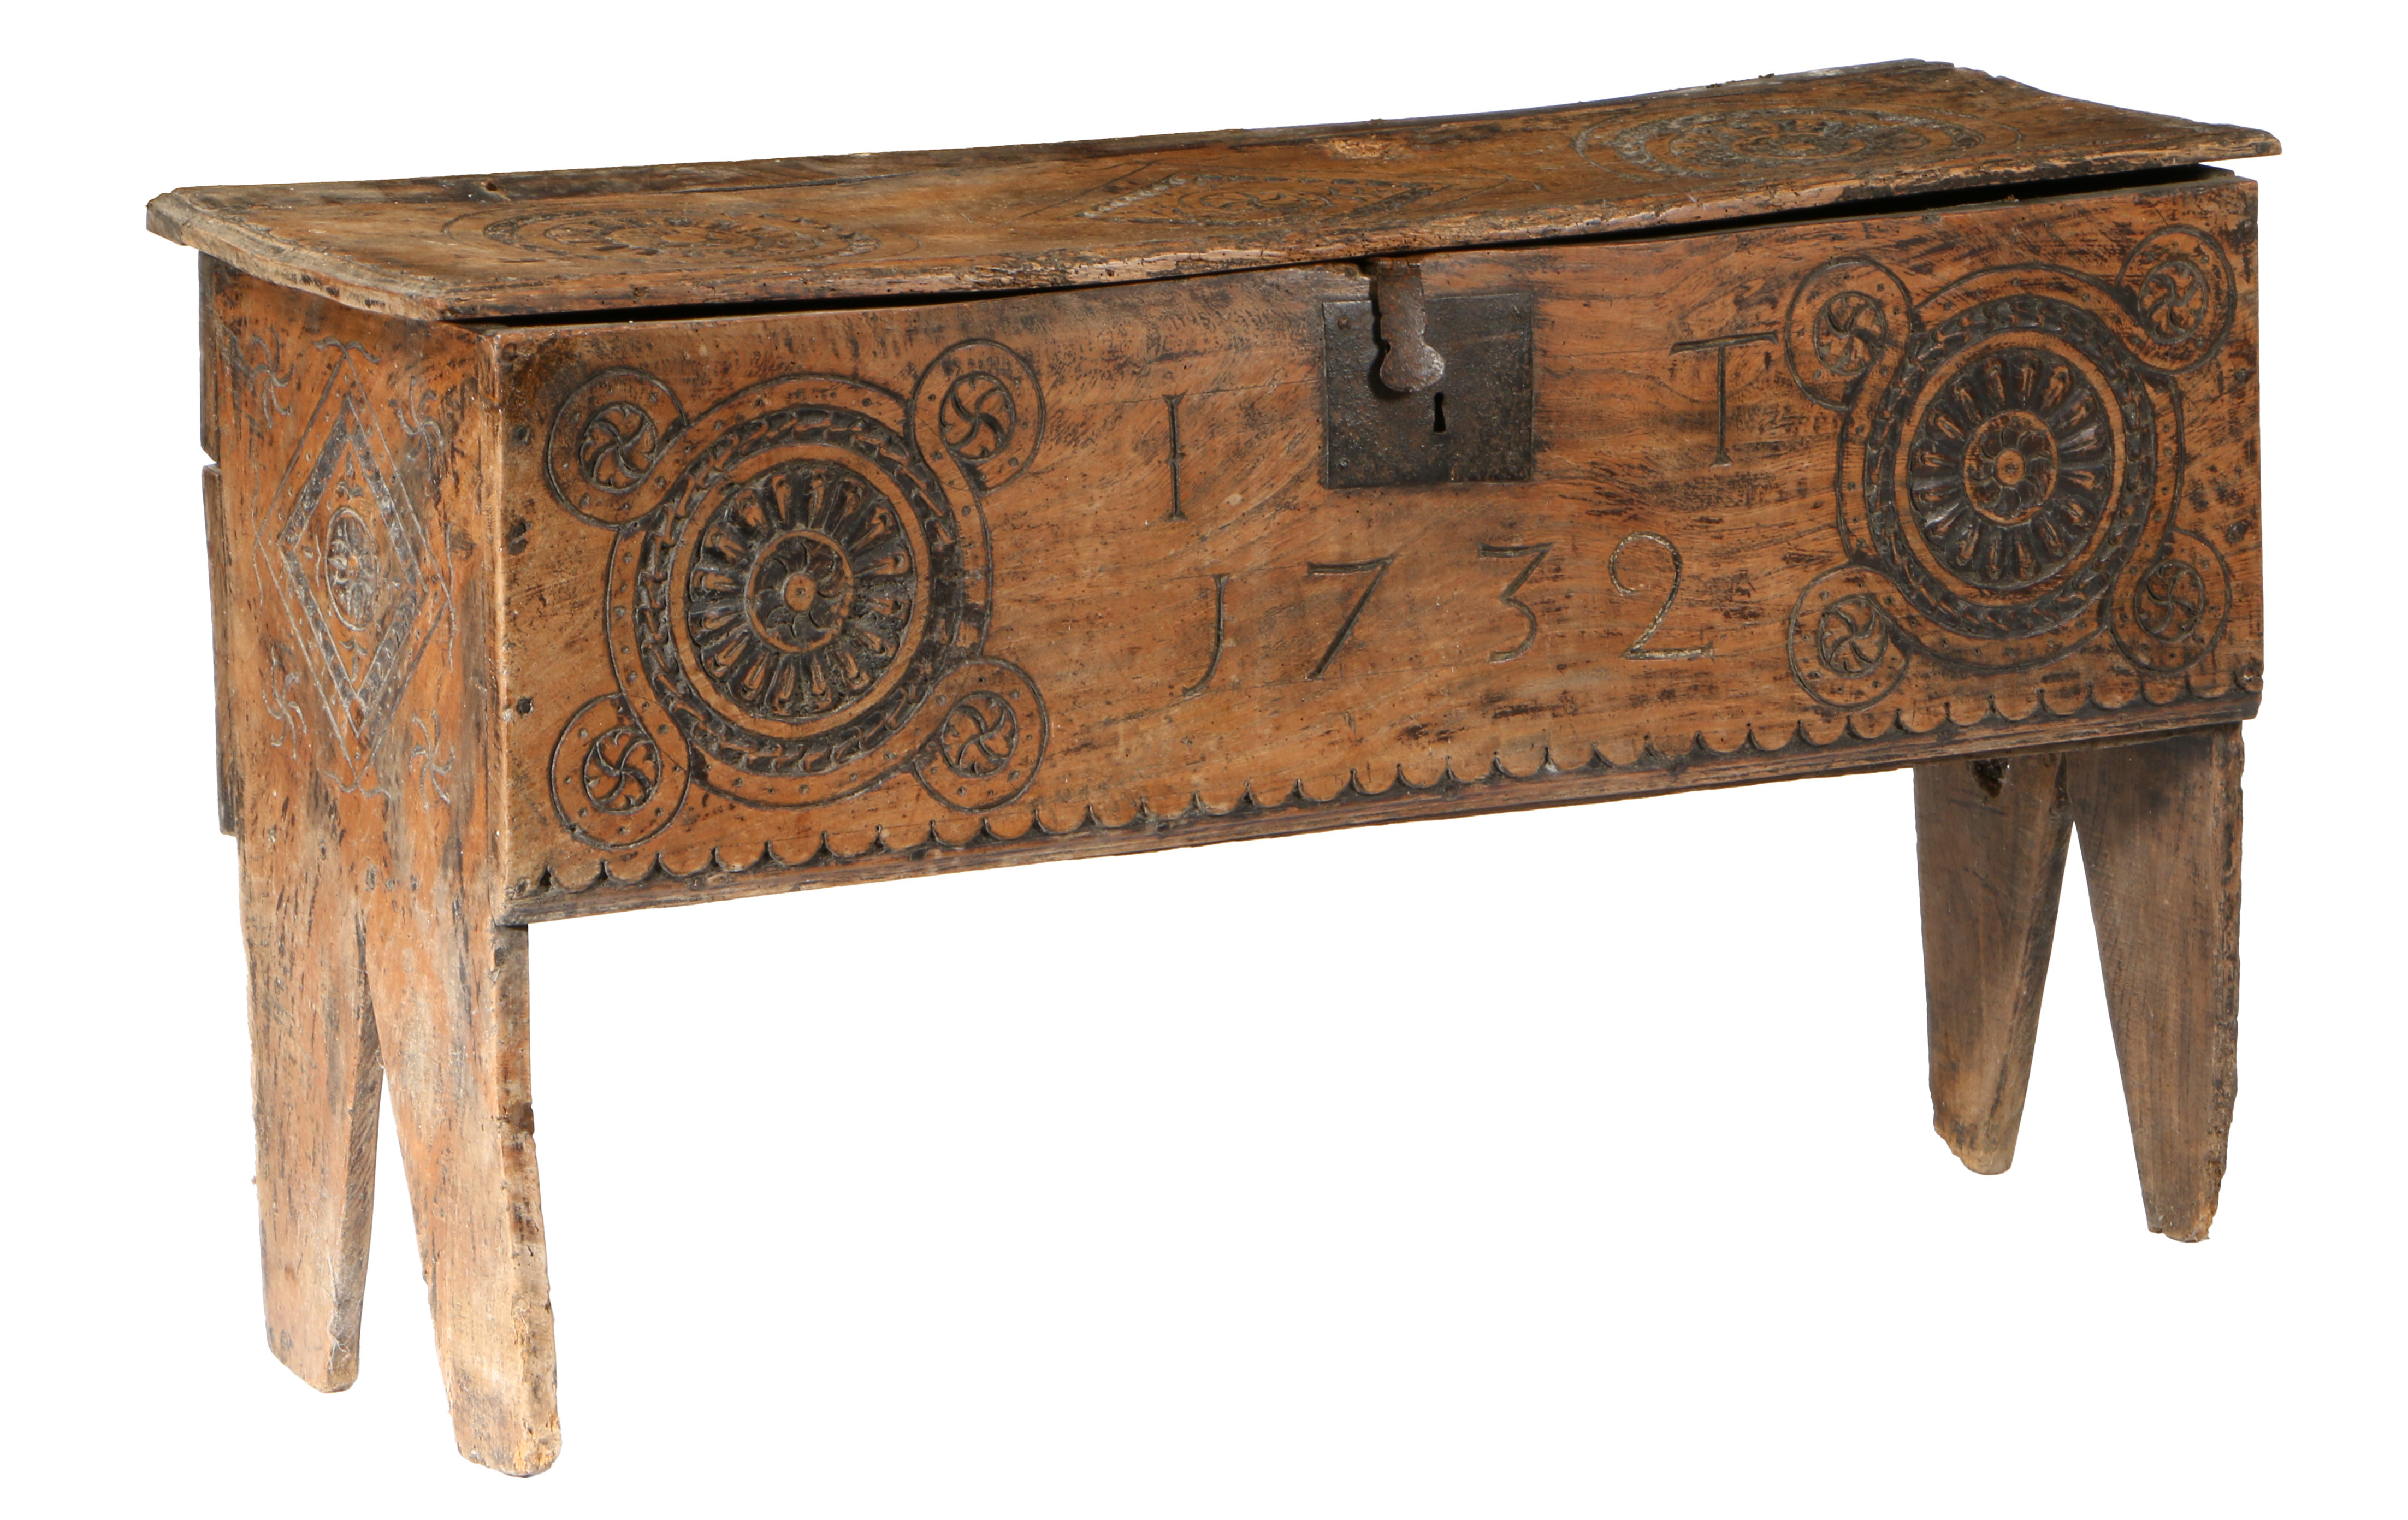 A LATE 17TH CENTURY OAK BOARDED COFFER. - Image 2 of 3